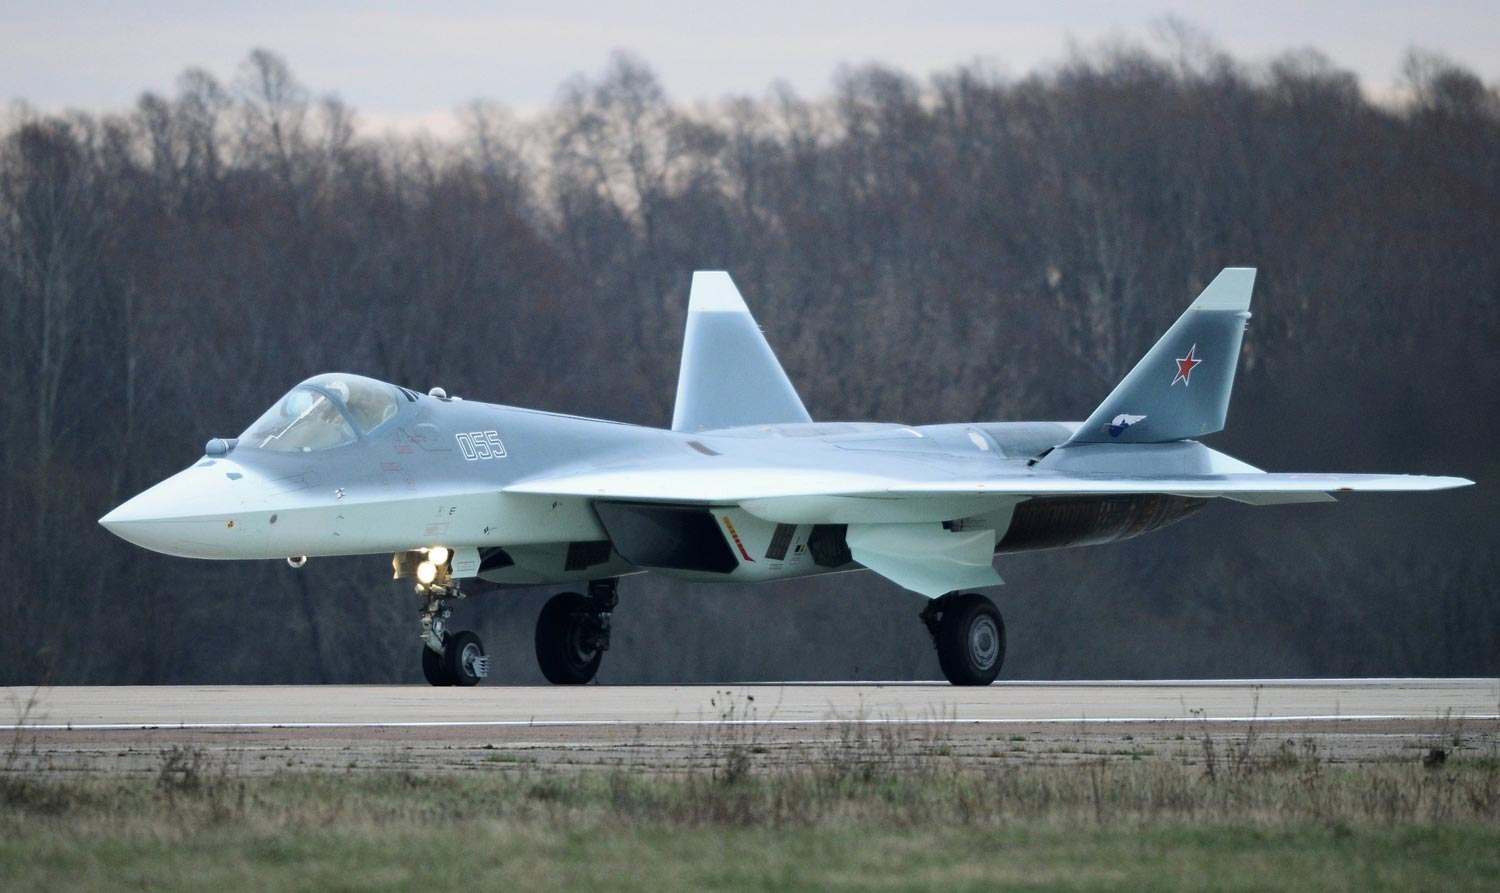 Sukhoi_Su-57_5th-Gen_Low-Observable_Stealth_Jet_Fighter_Aircraft_UAS_UAV_Drone_Aircraft_Russian_Defense_Ministry_2.jpg